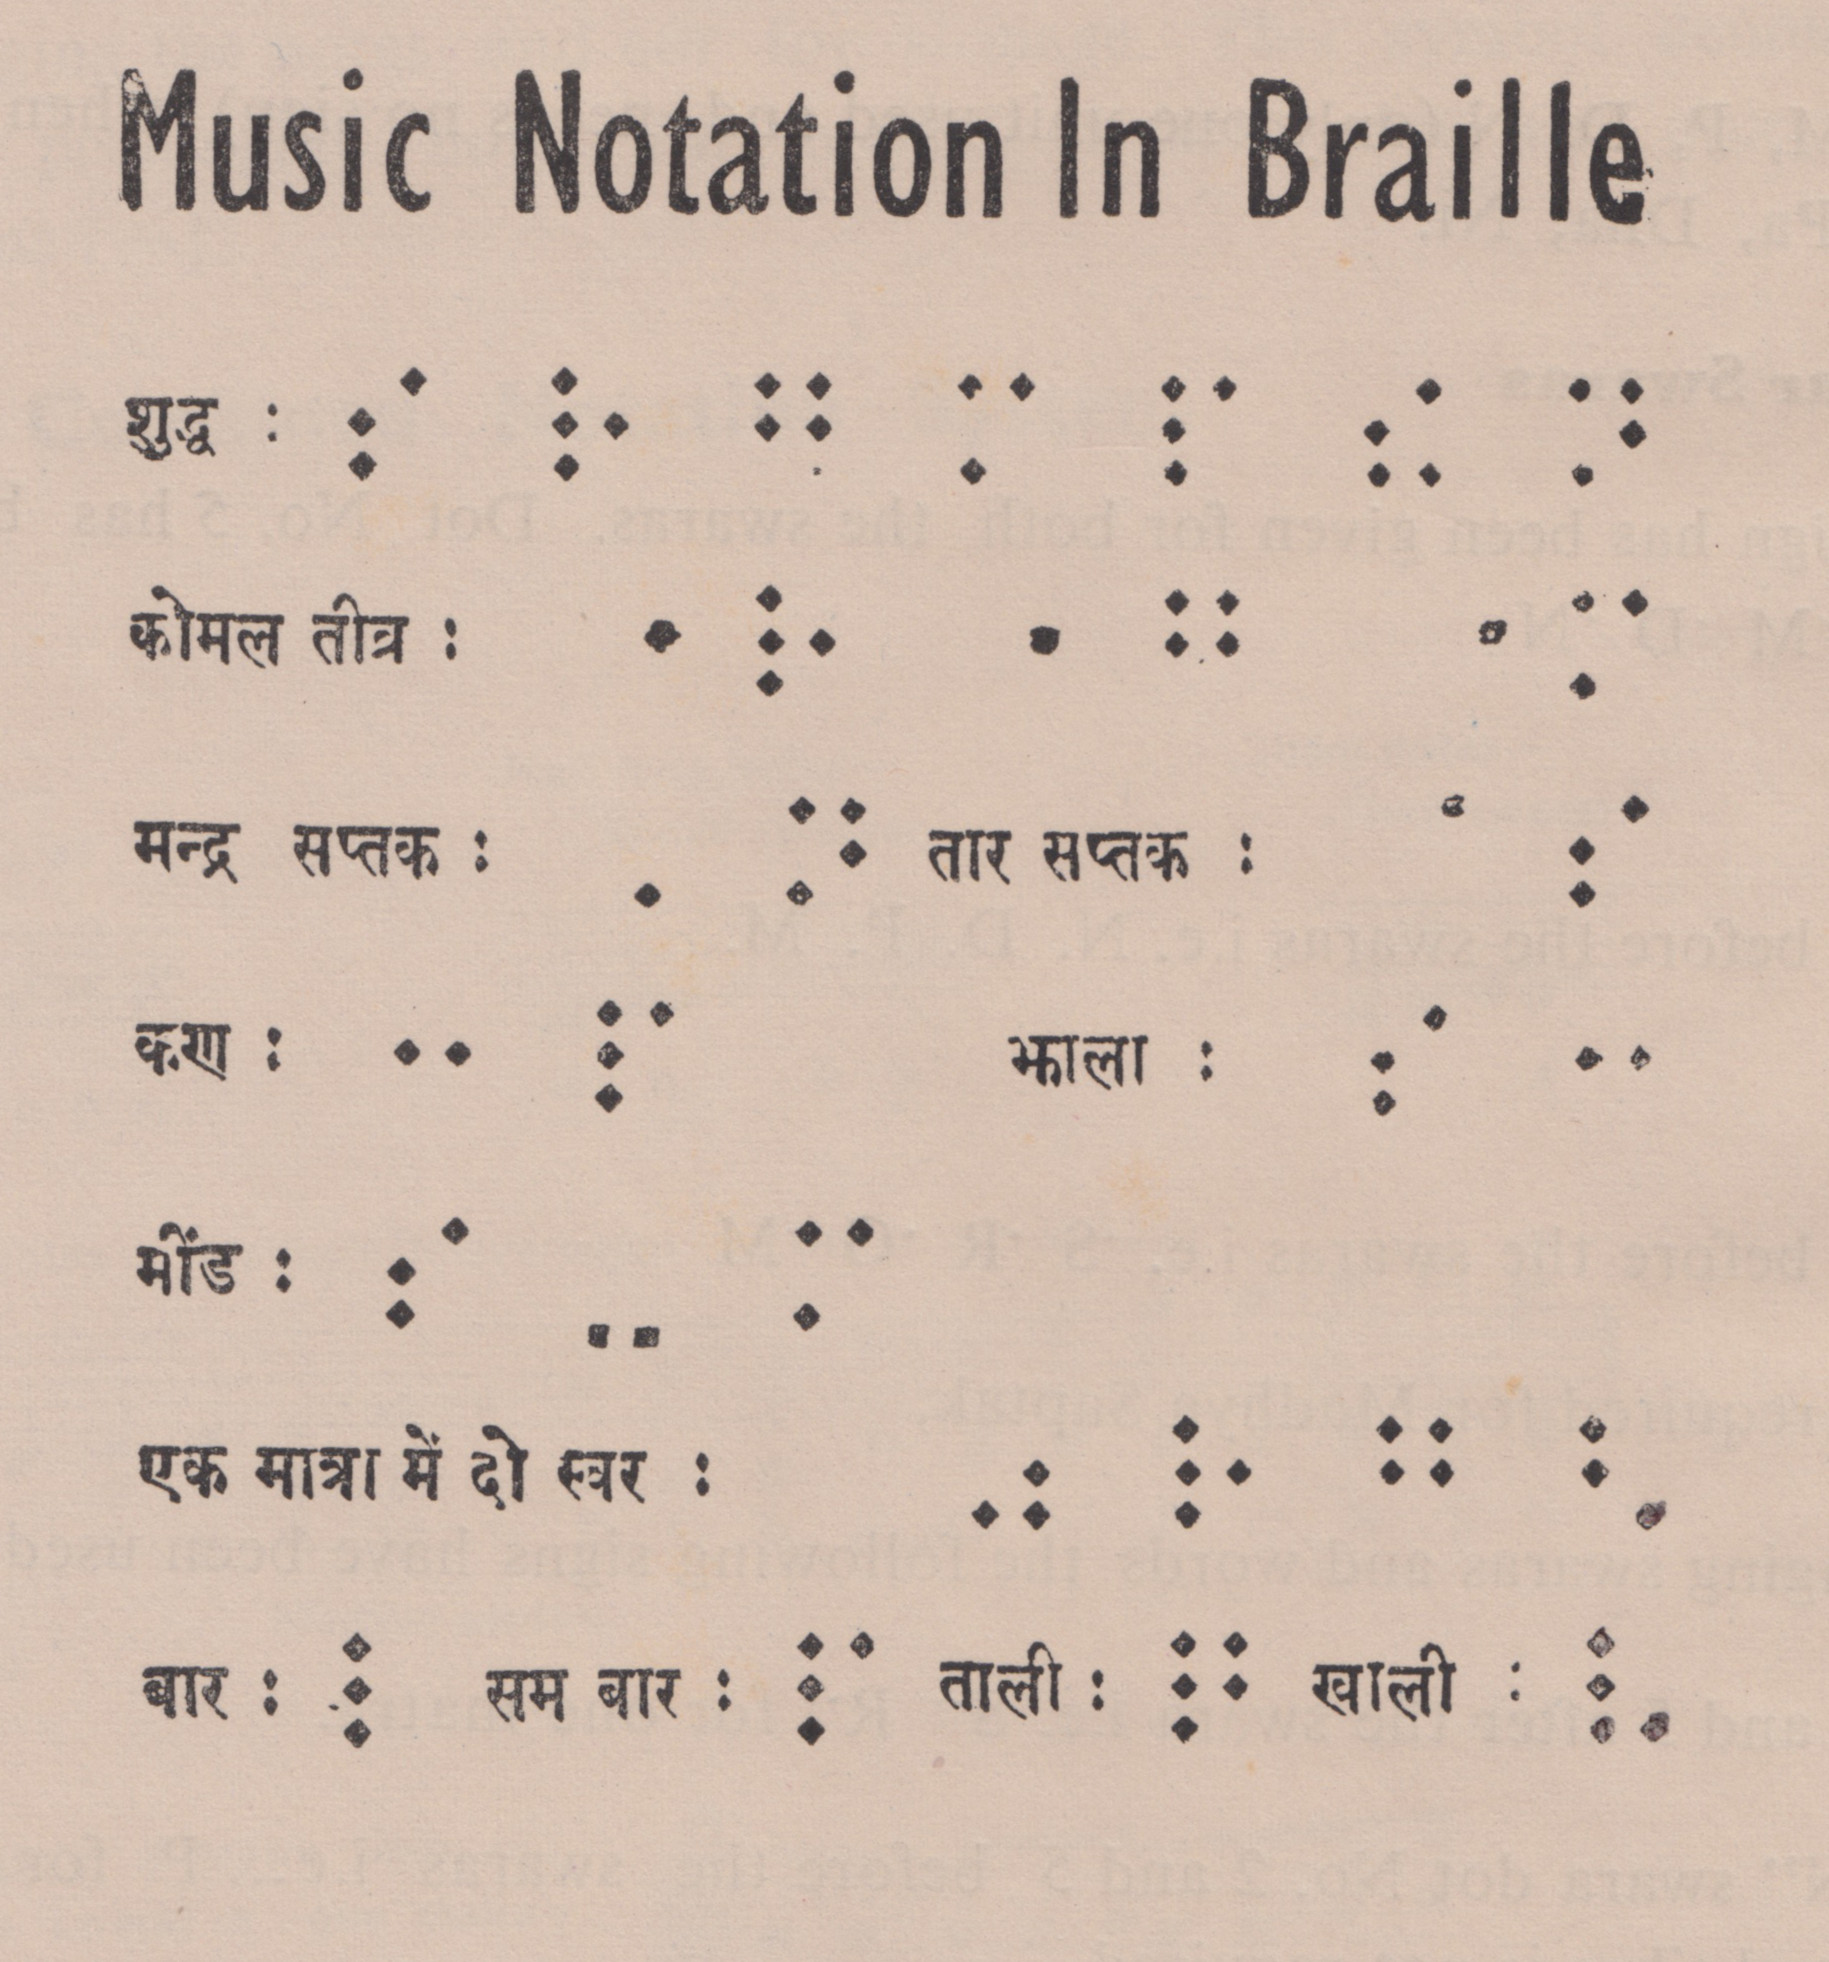 Indian music in braille